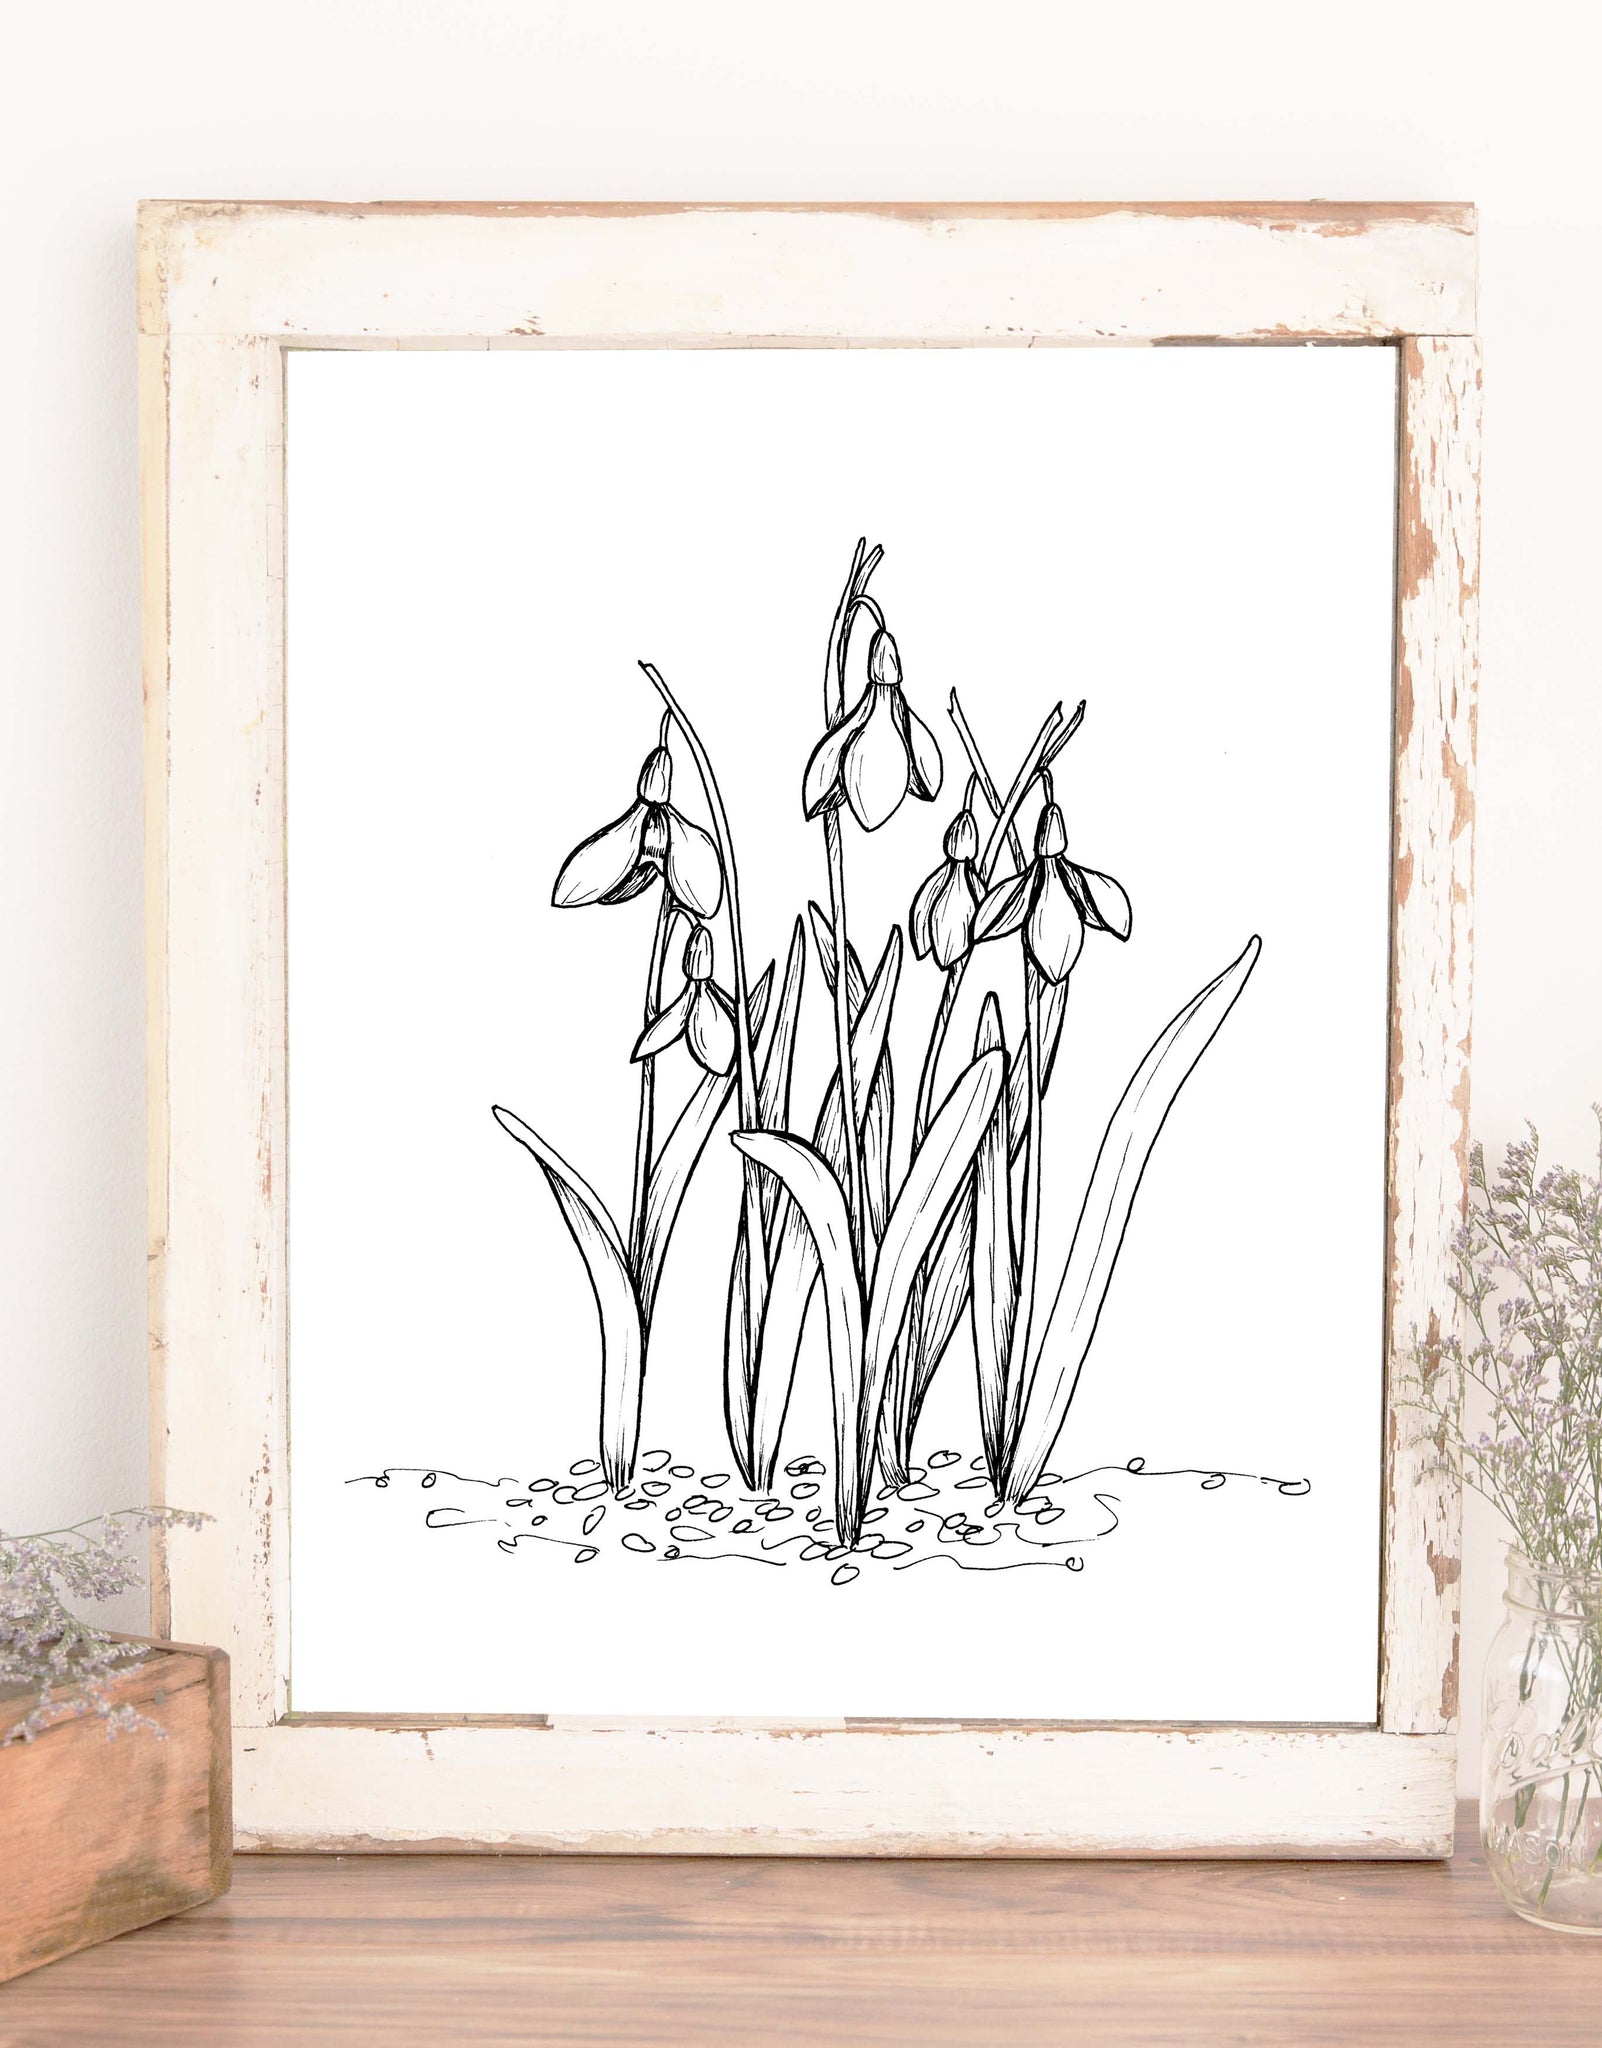 Illustrated wall art design of snowdrop flowers in black and white